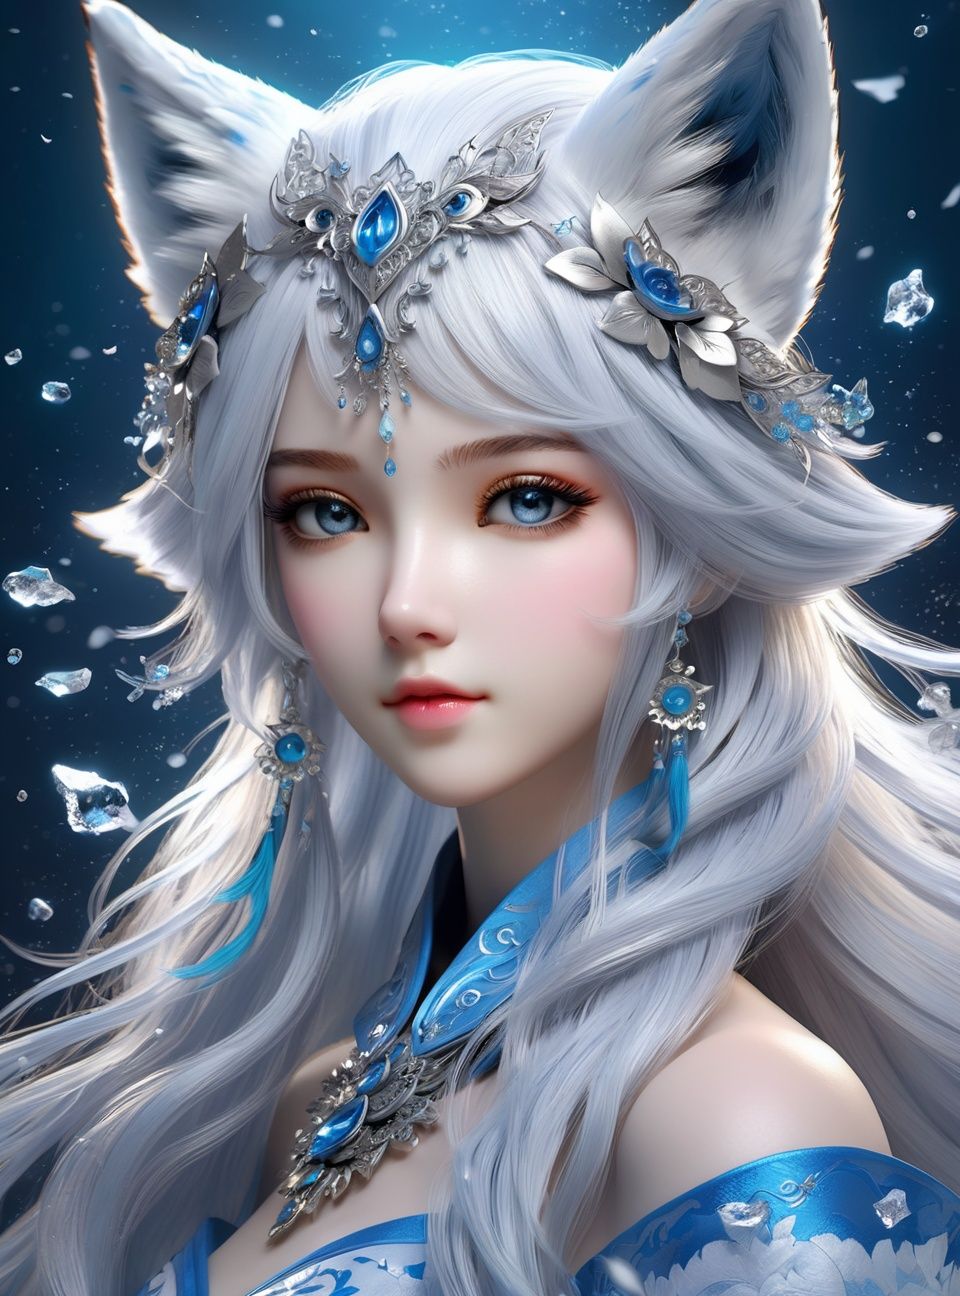 masterpiece, best quality,official art, extremelydetailed cg 8k wallpaper,(flying petals)(detailed ice) , crystalstexture skin, coldexpression, ((fox ears)),white hair, longhair, messy hair, blue eye,looking at viewer,extremely delicate andbeautiful, water, ((beautydetailed eye)), highlydetailed, cinematiclighting, ((beautiful face),fine water surface, (originalfigure painting), ultra-detailed, incrediblydetailed, (an extremelydelicate and beautiful),beautiful detailed eyes,(best quality)